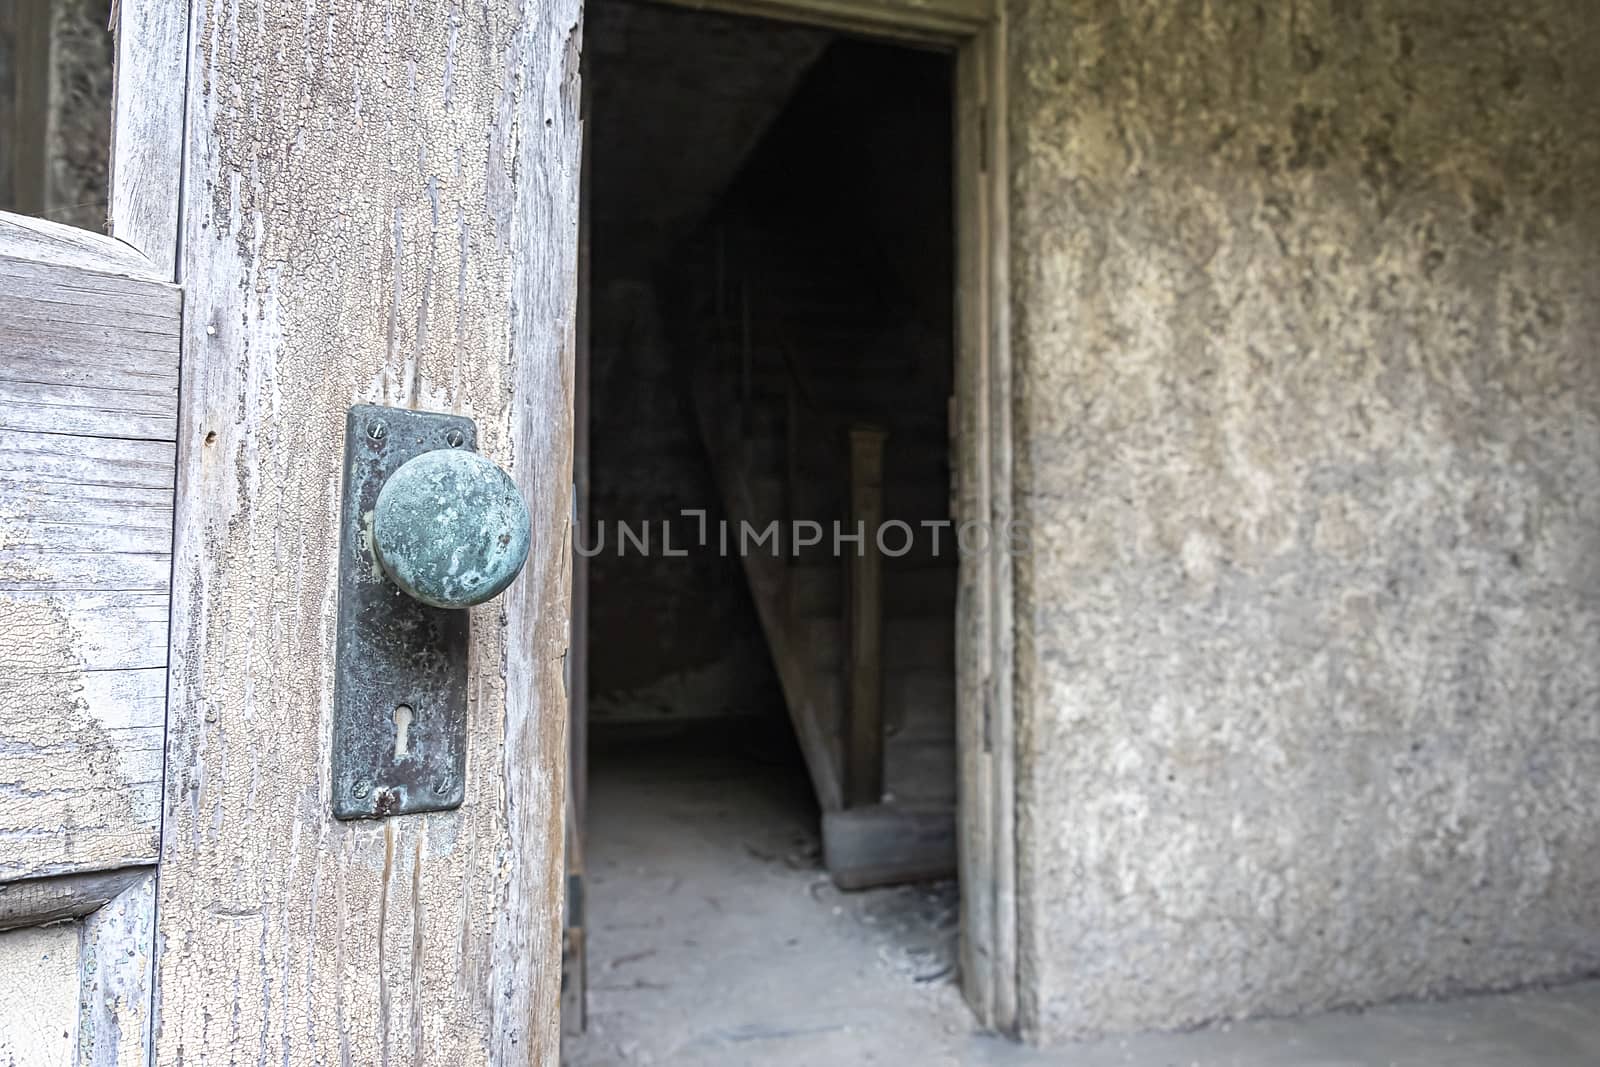 USA, New York, Ellis Island - May 2019: Close up of corroded green door handle and the entrance to a dark stairway in an abandoned building